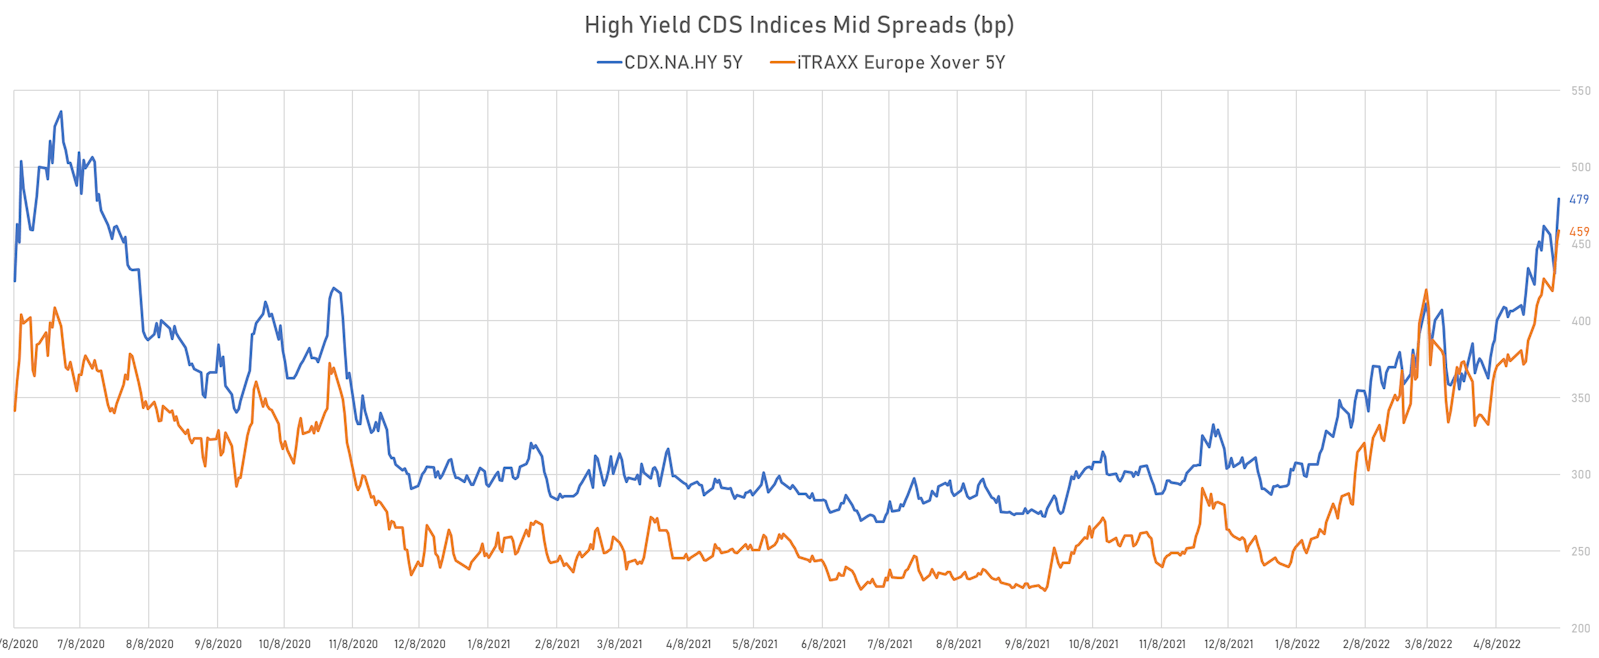 iTRAXX Europe Crossover 5Y vs CDX NA HY 5Y CDS Indices Mid Spreads | Sources: ϕpost, Refinitiv data